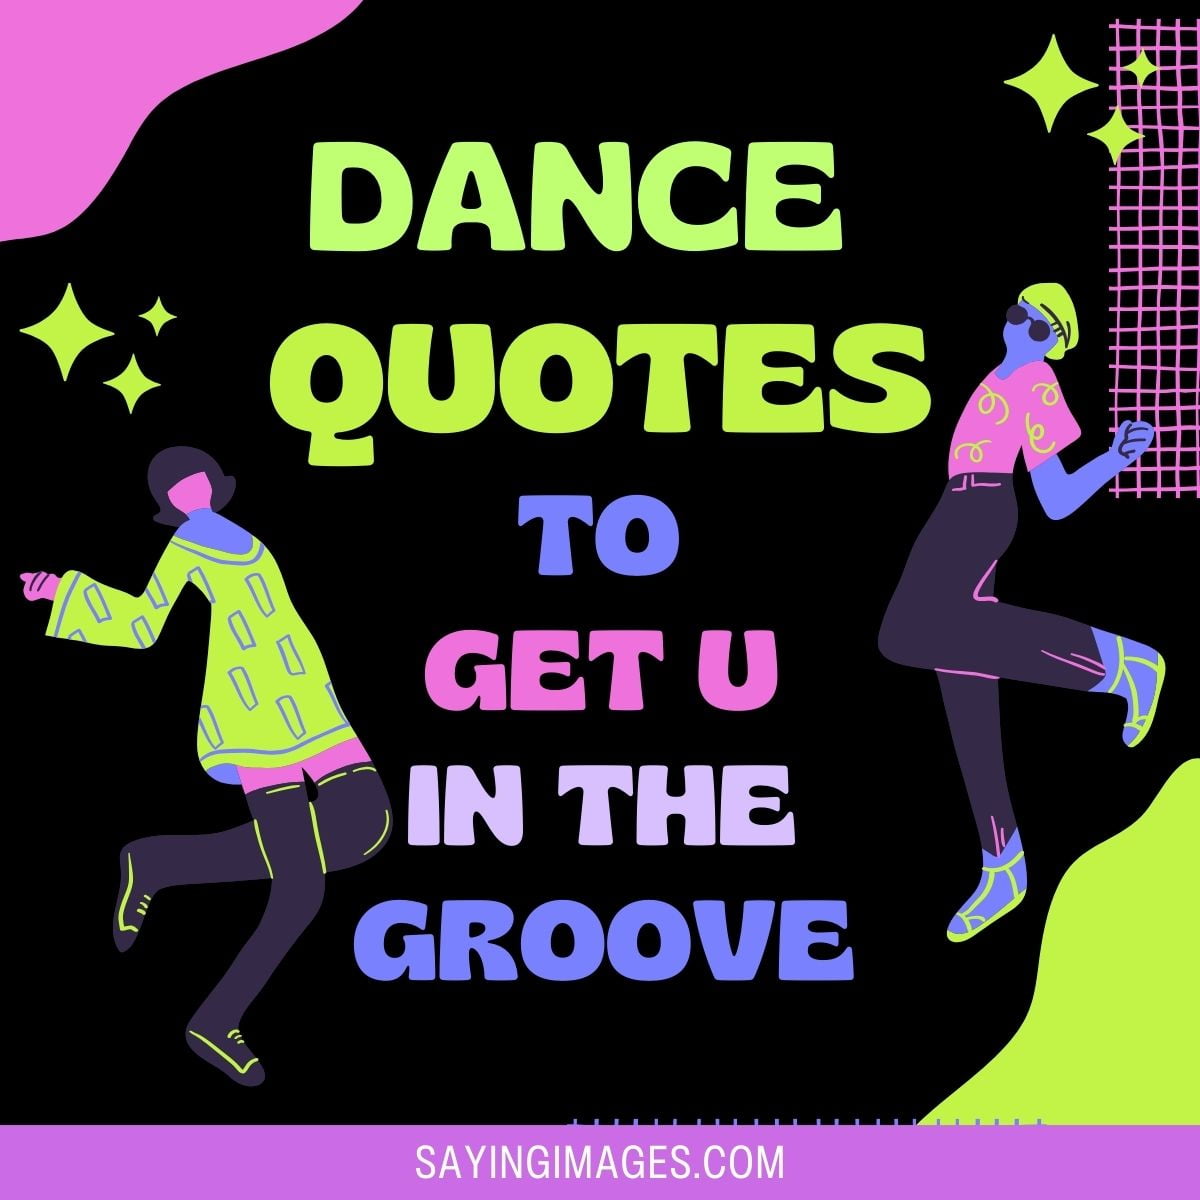 40 Dance Quotes to Get You in the Groove